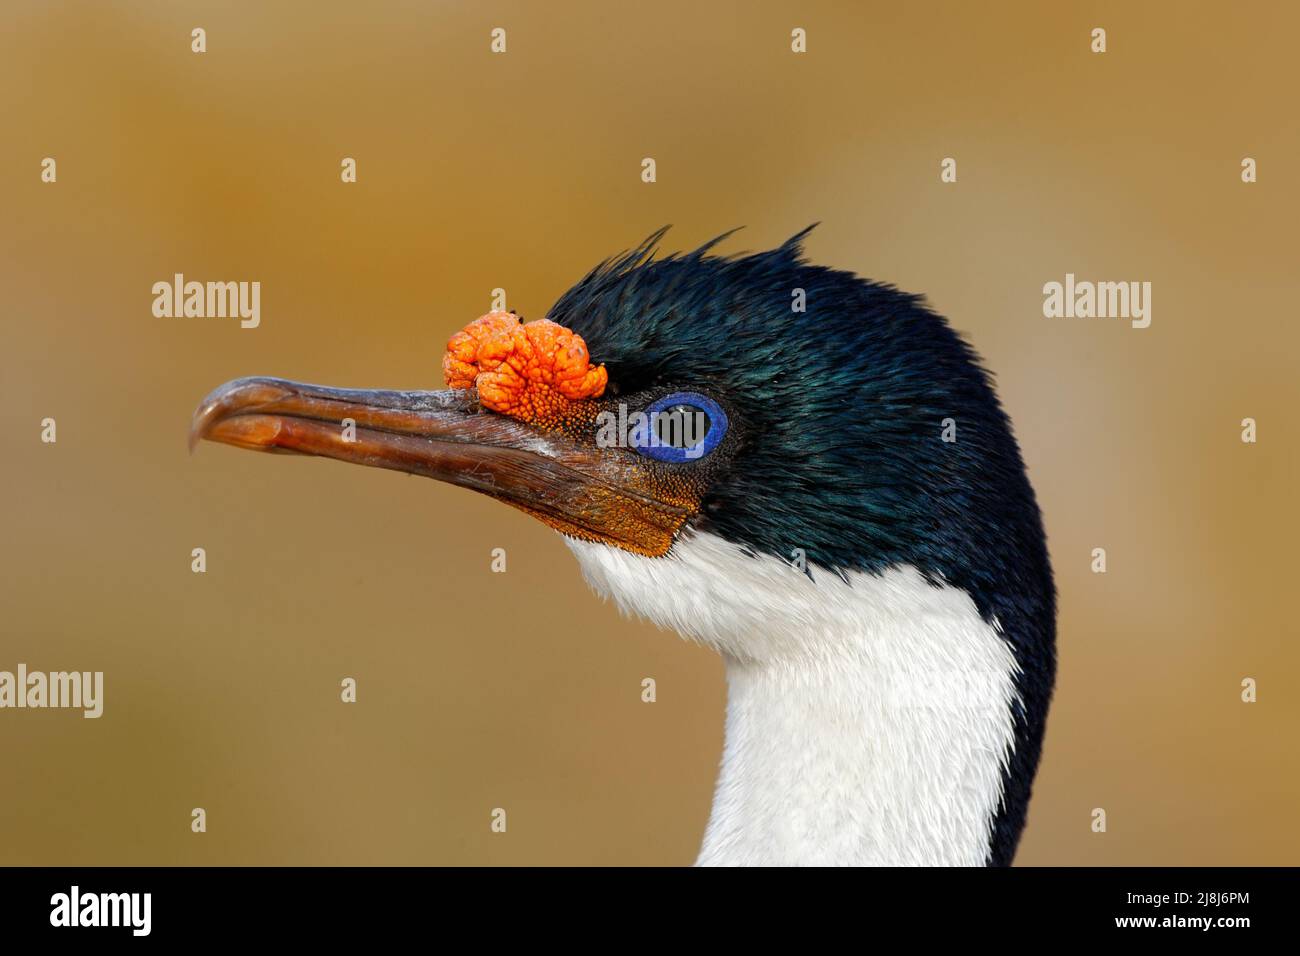 Detail portrait of Imperial Shag, Phalacrocorax atriceps, black and white cormorant with blue eyea from Falkland Islands Stock Photo